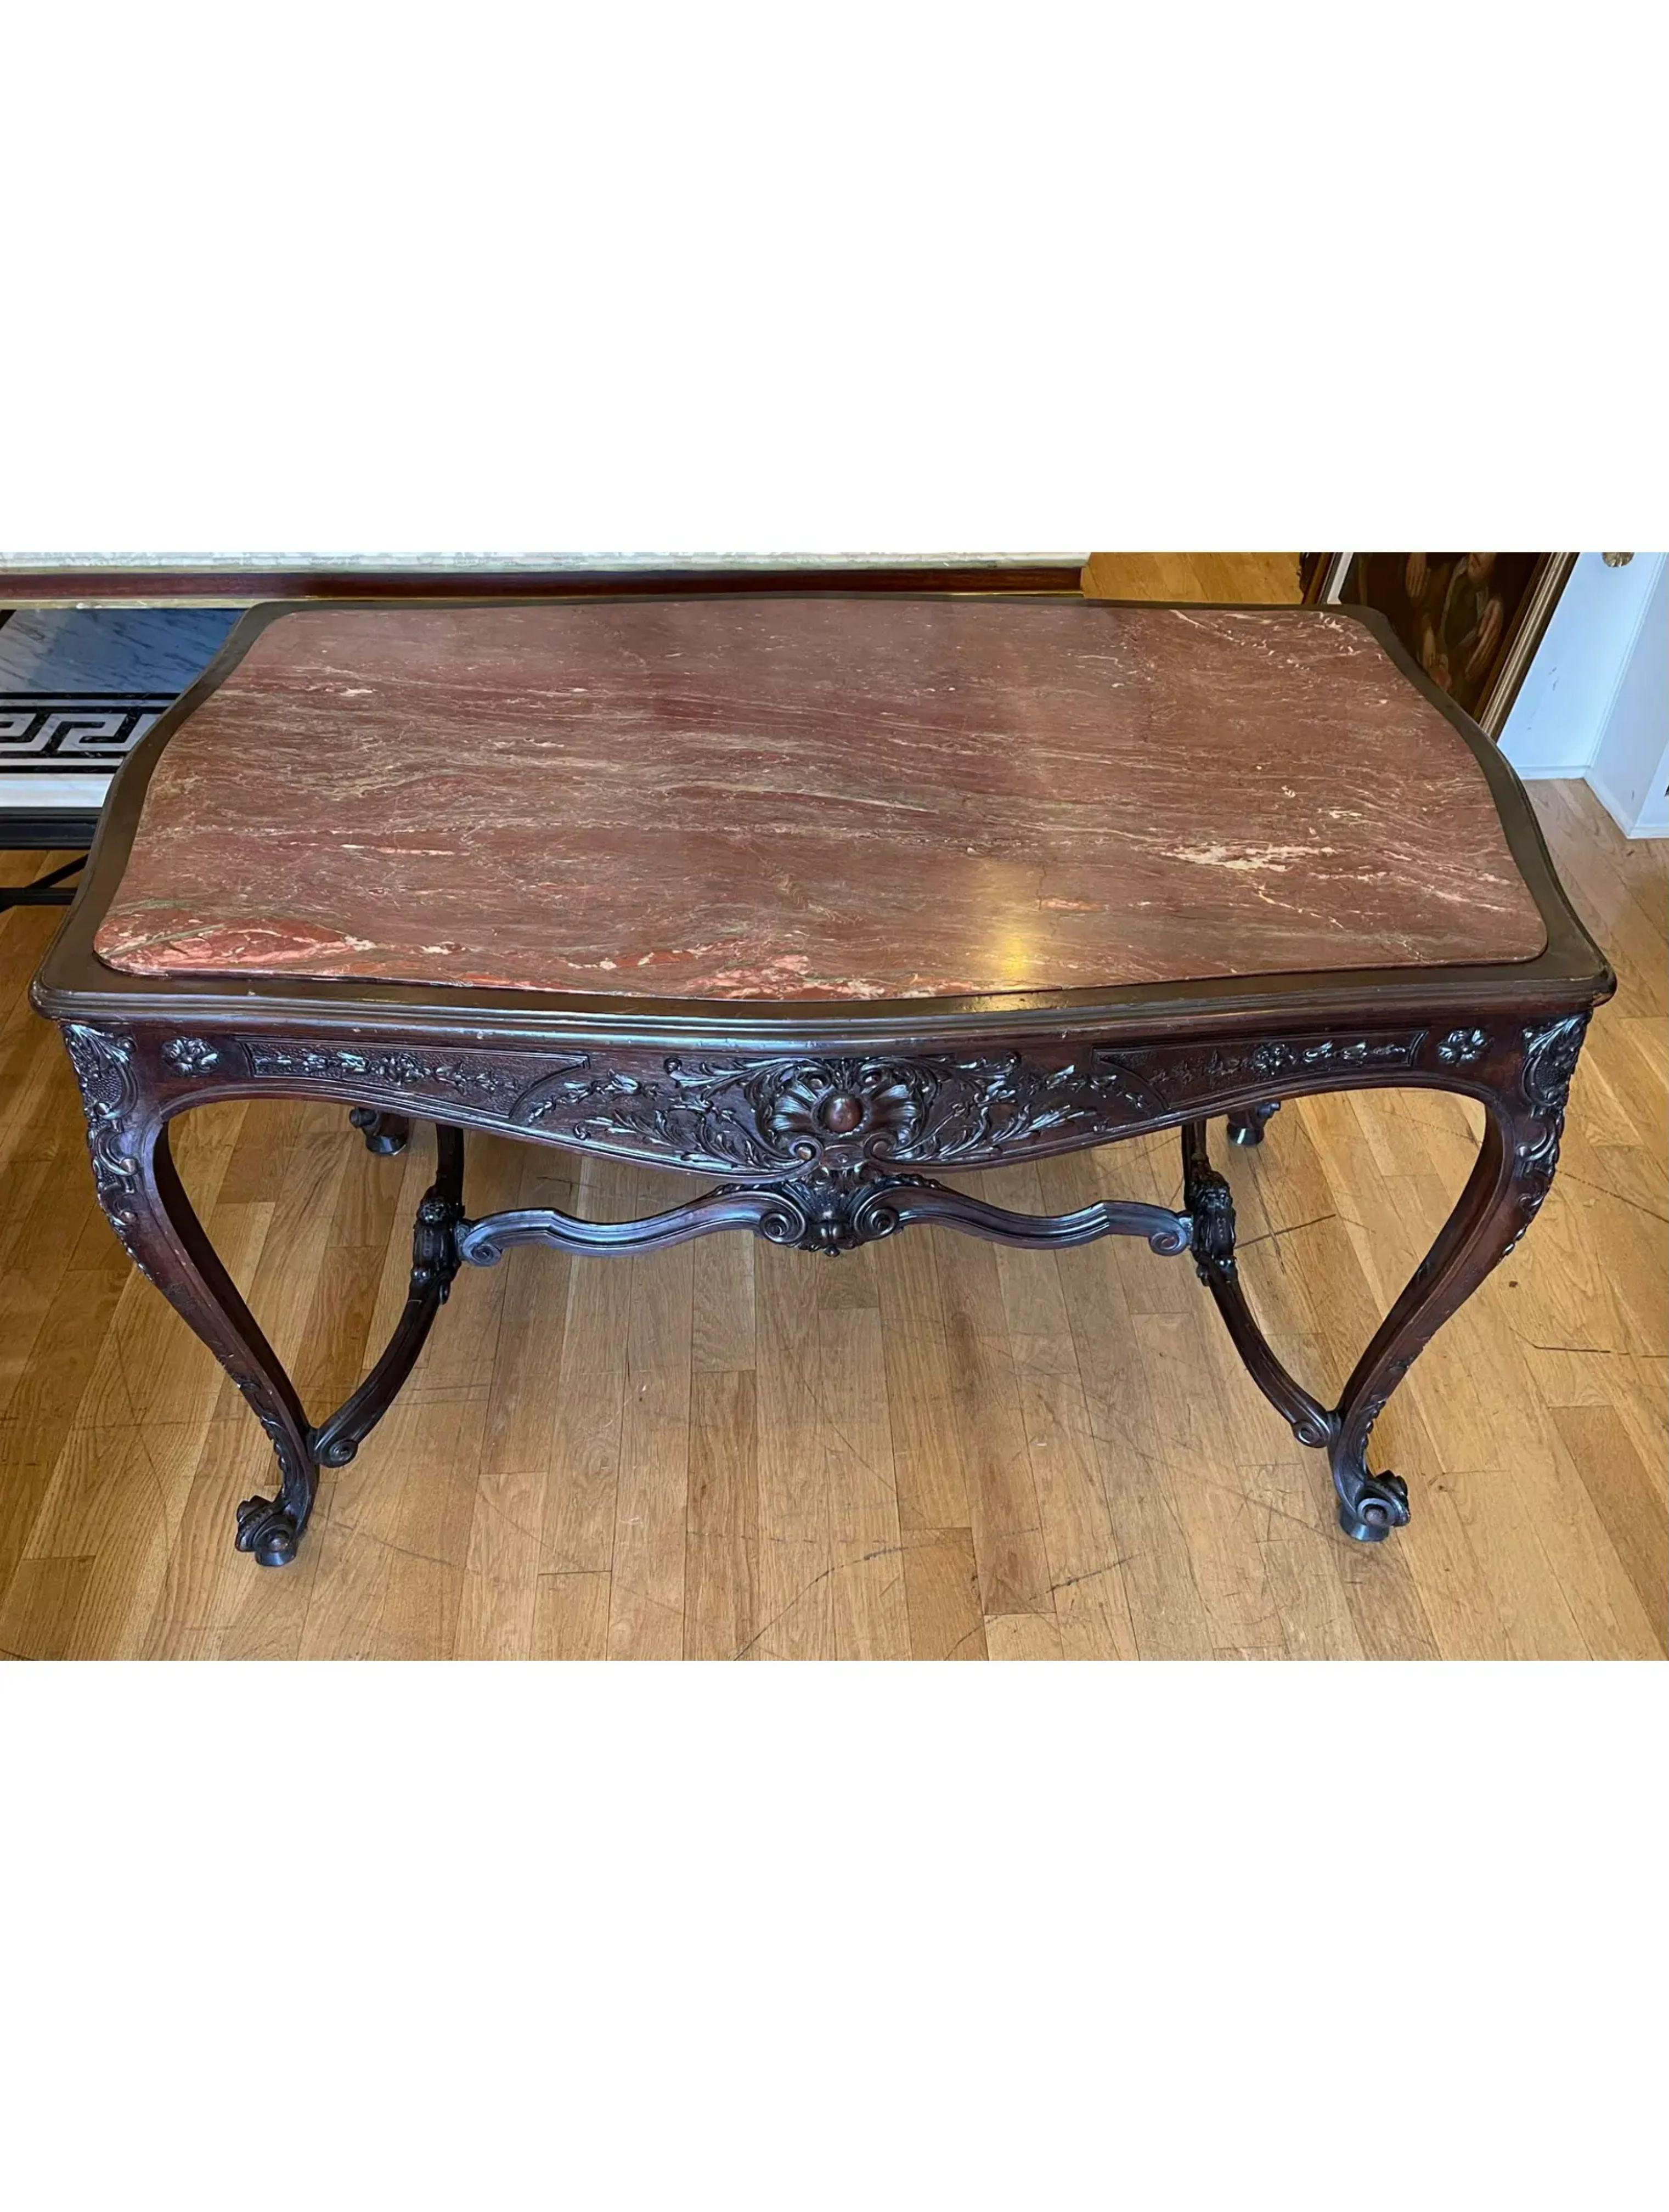 Antique French Provincial Marble Top Center Table, Early 19th Century In Good Condition For Sale In LOS ANGELES, CA